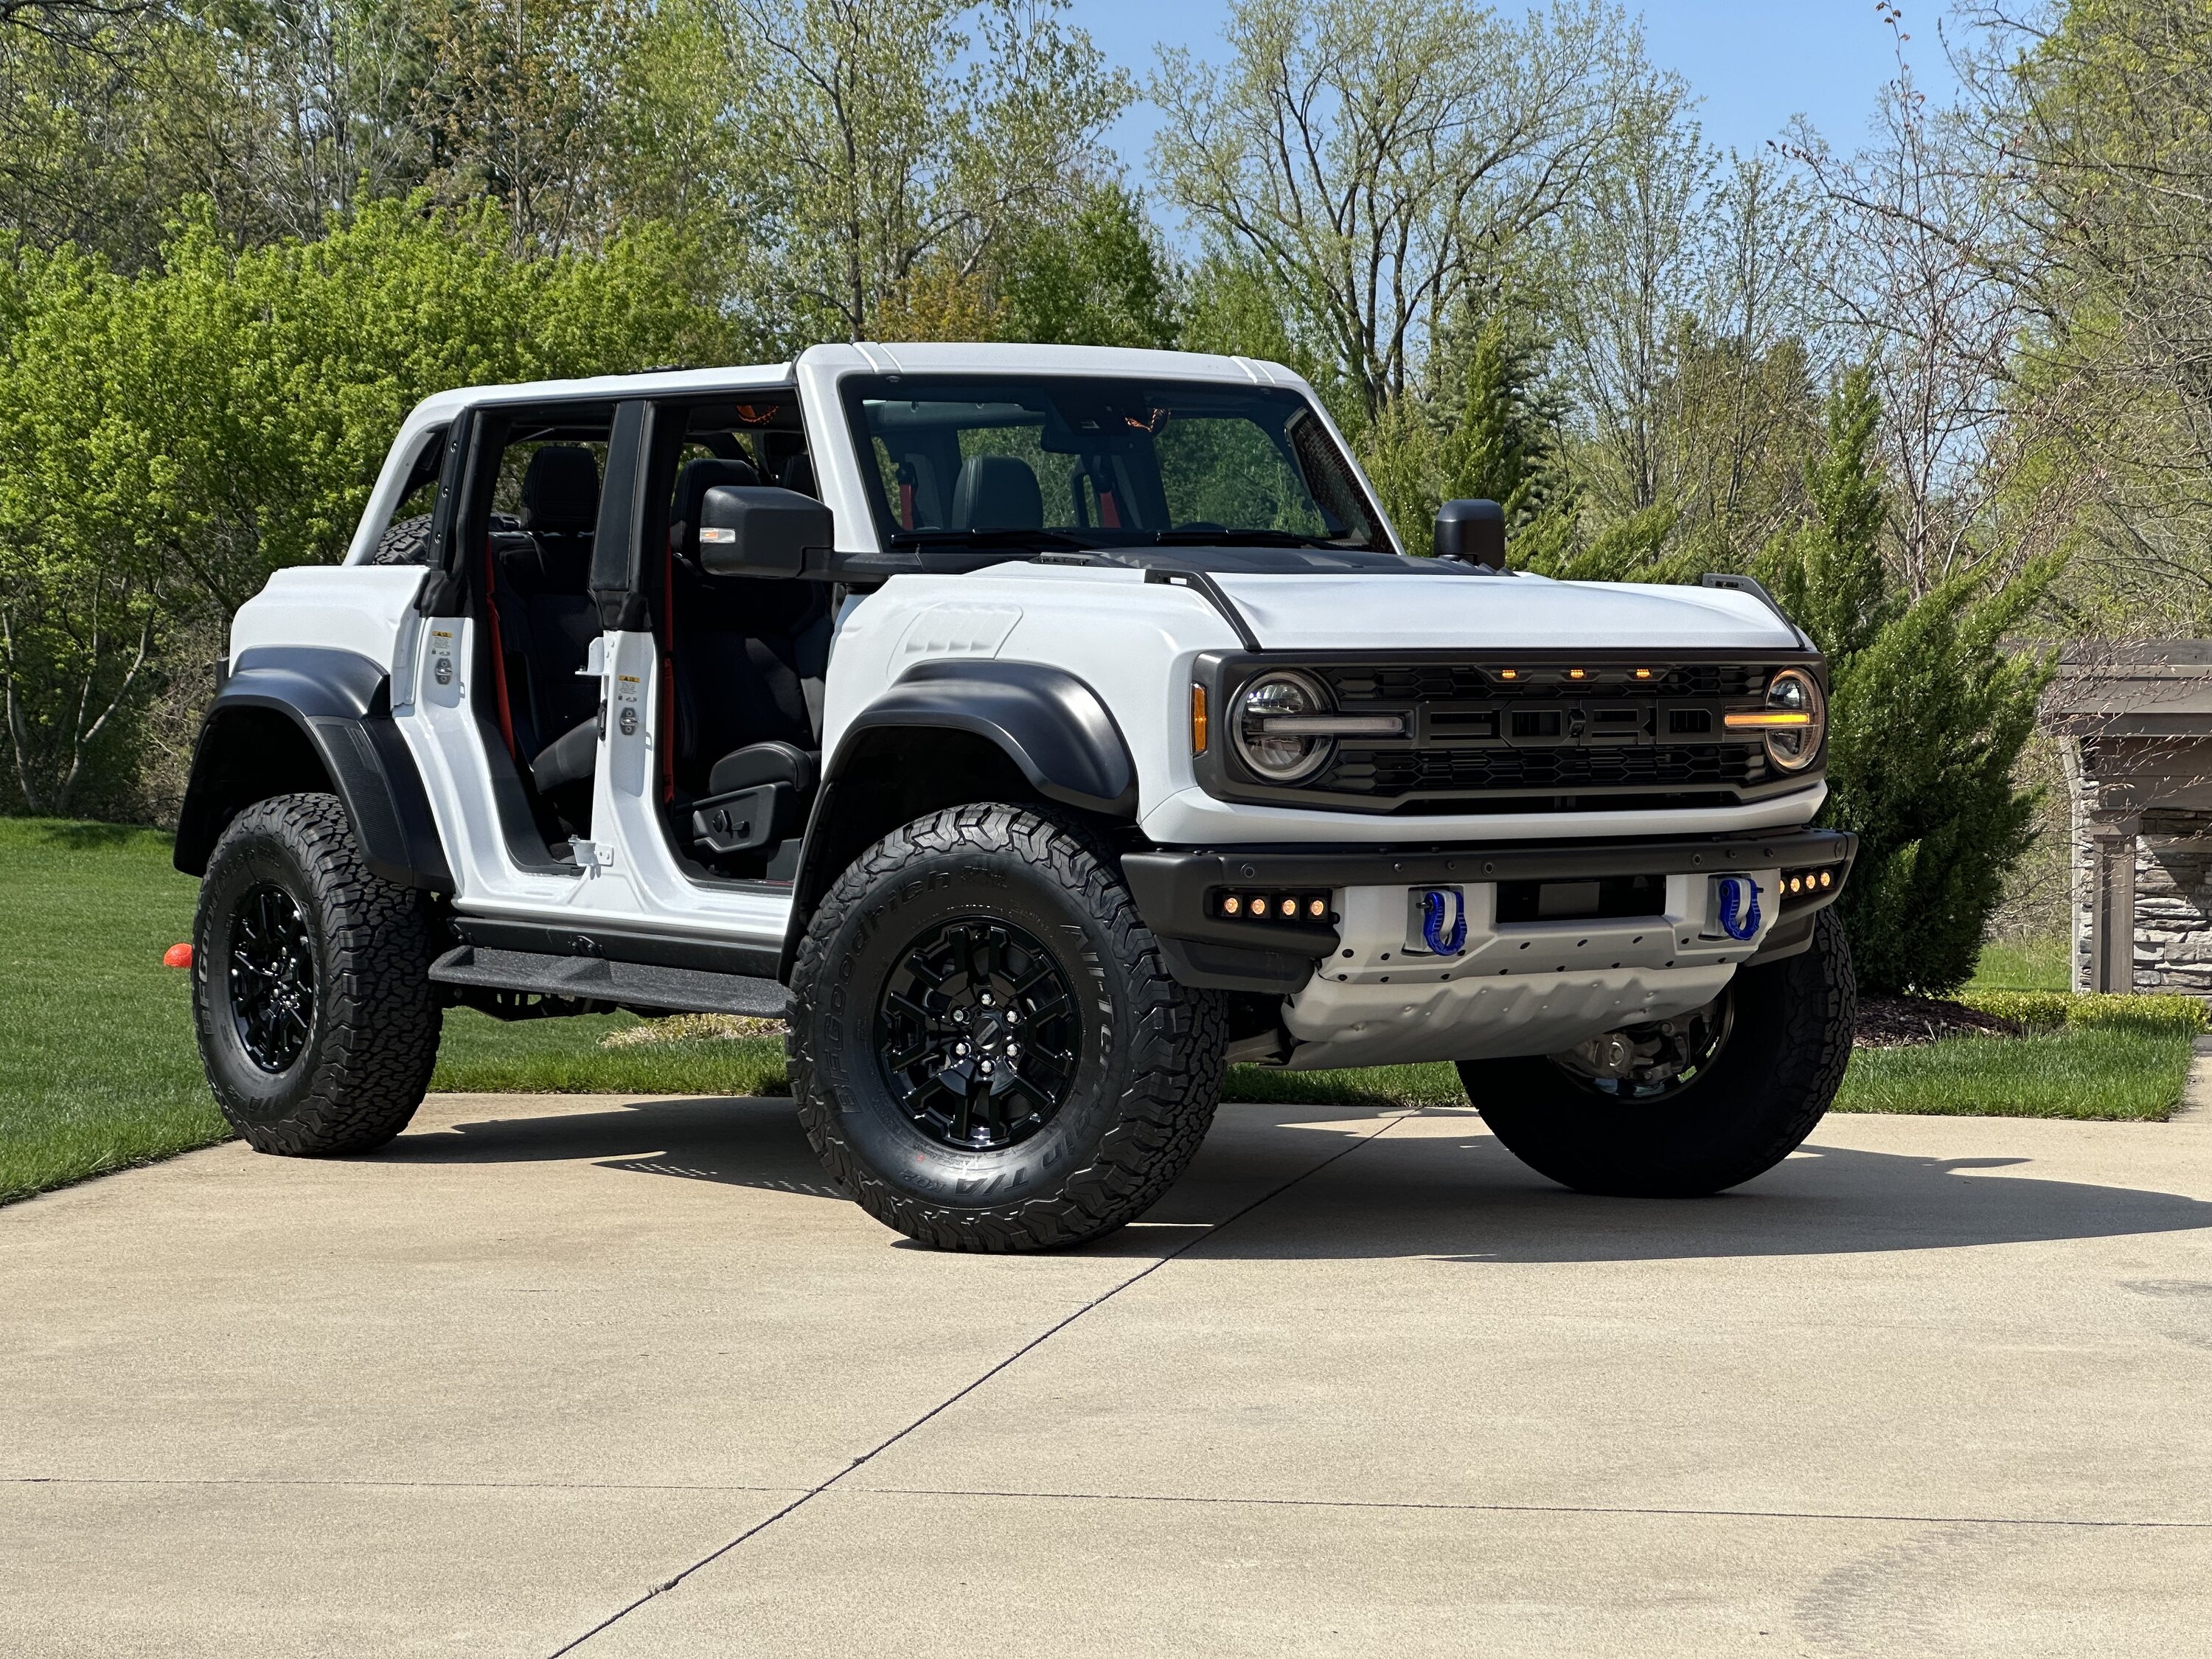 Ford Bronco XPEL Stealth PPF Wrap Completed on Bronco Raptor in Oxford White IMG_1275